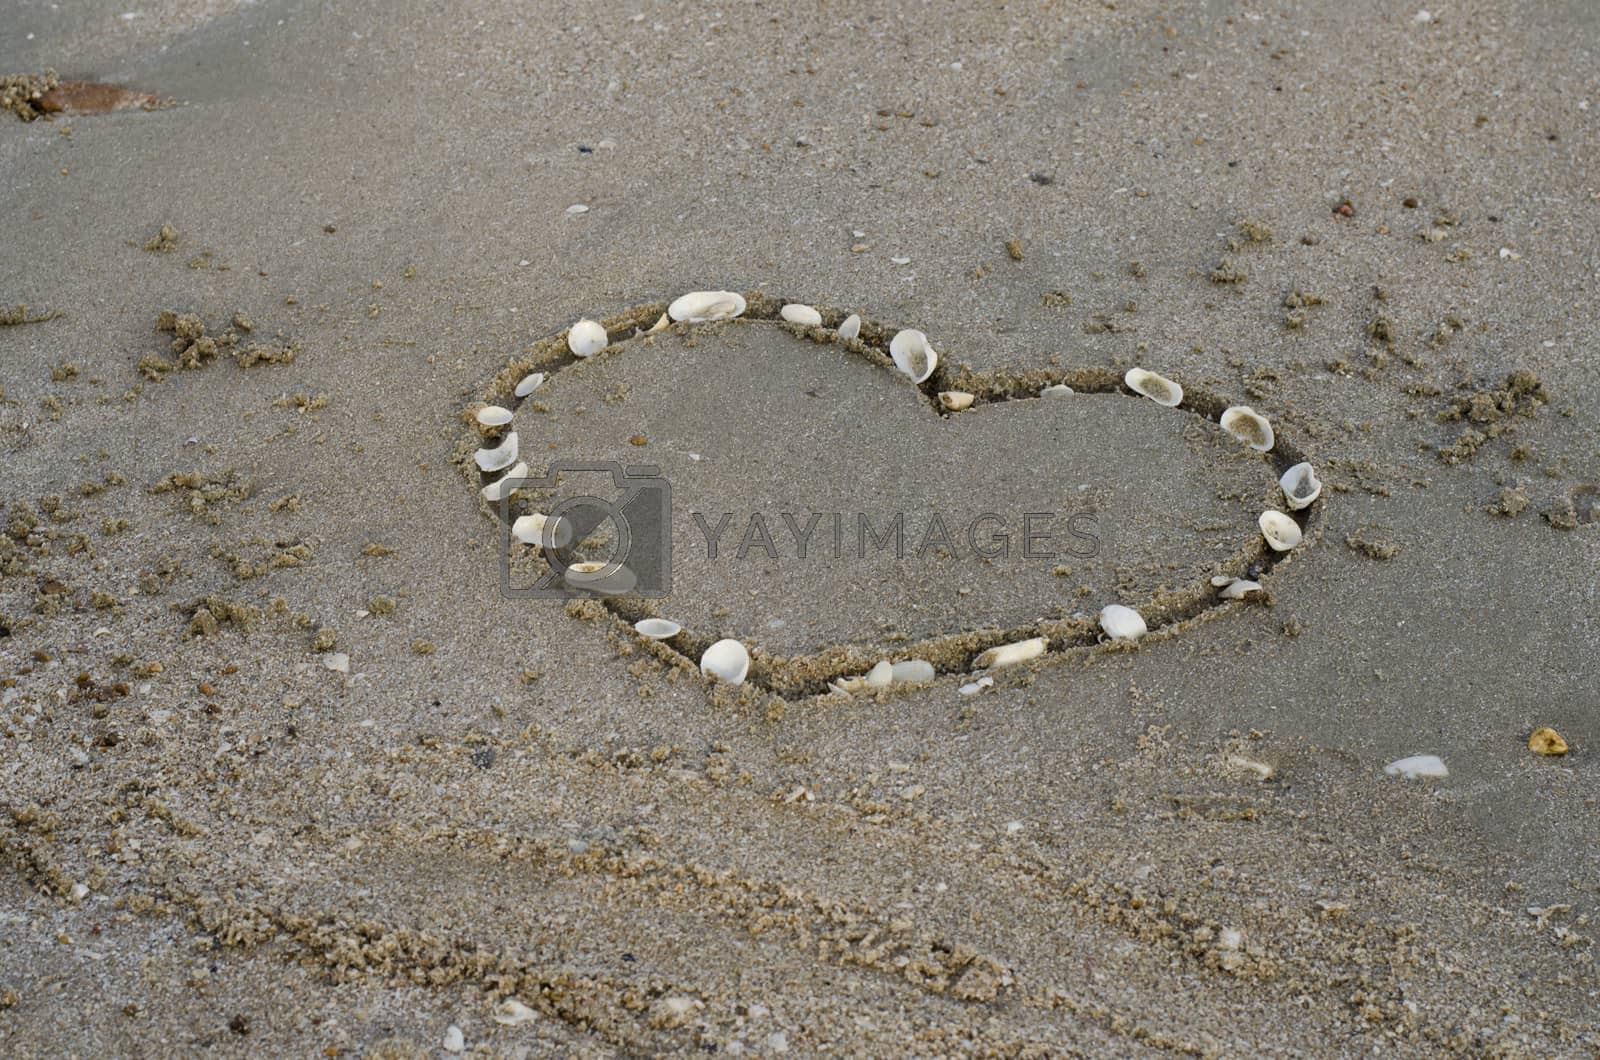 Royalty free image of a heart on the sand in the beach by ammza12